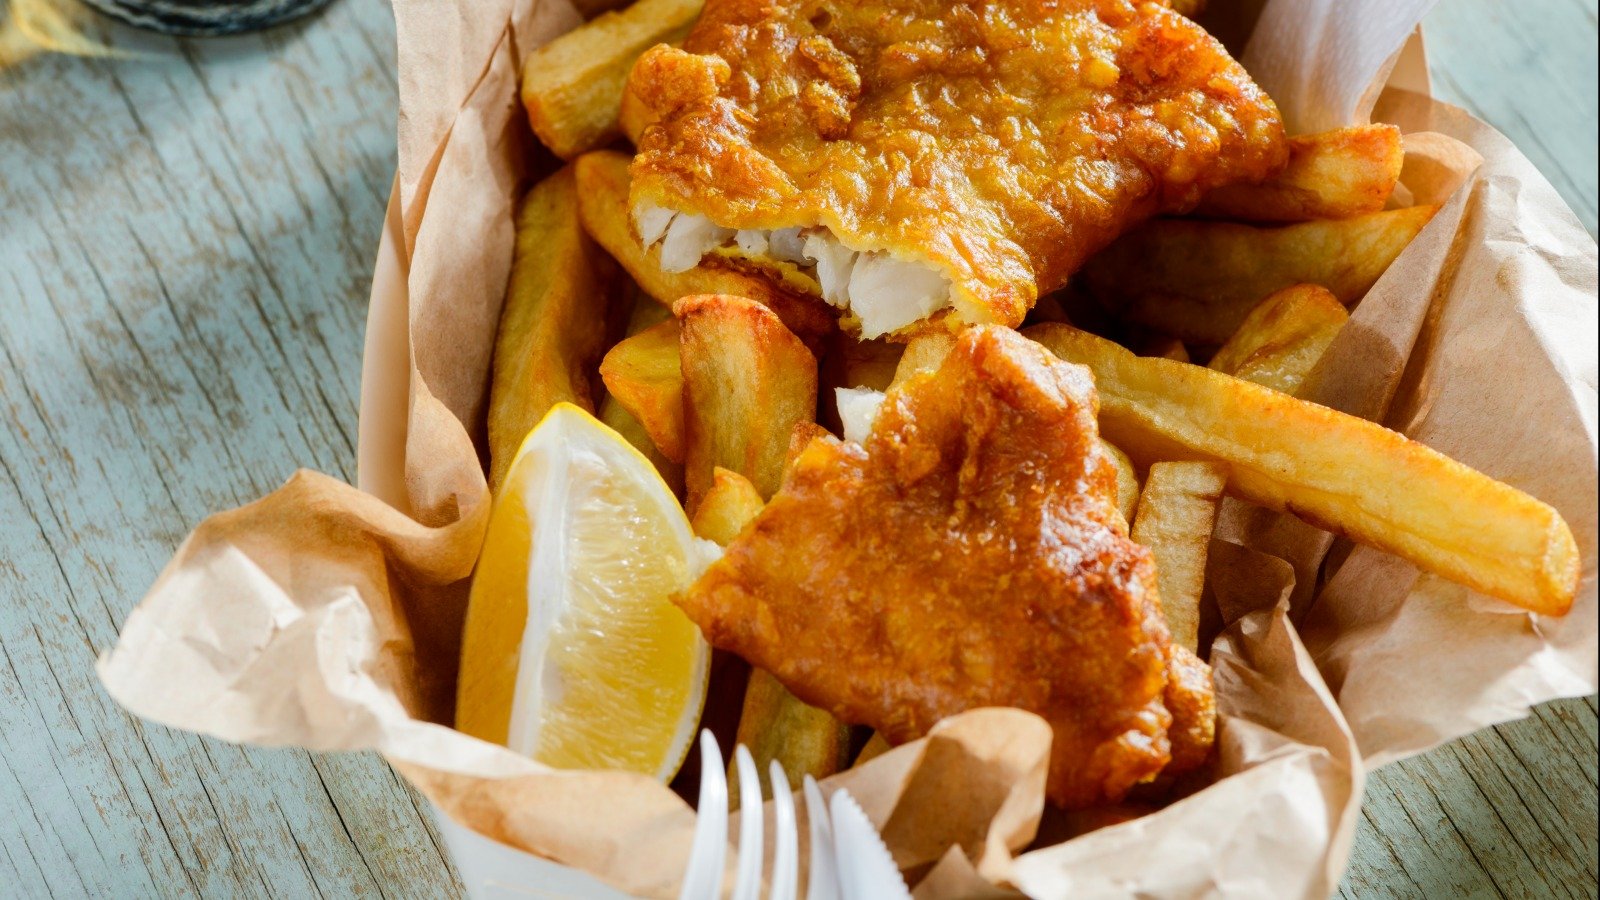 This Is The Only Type Of Vinegar You Should Have With Fish And Chips - Mashed